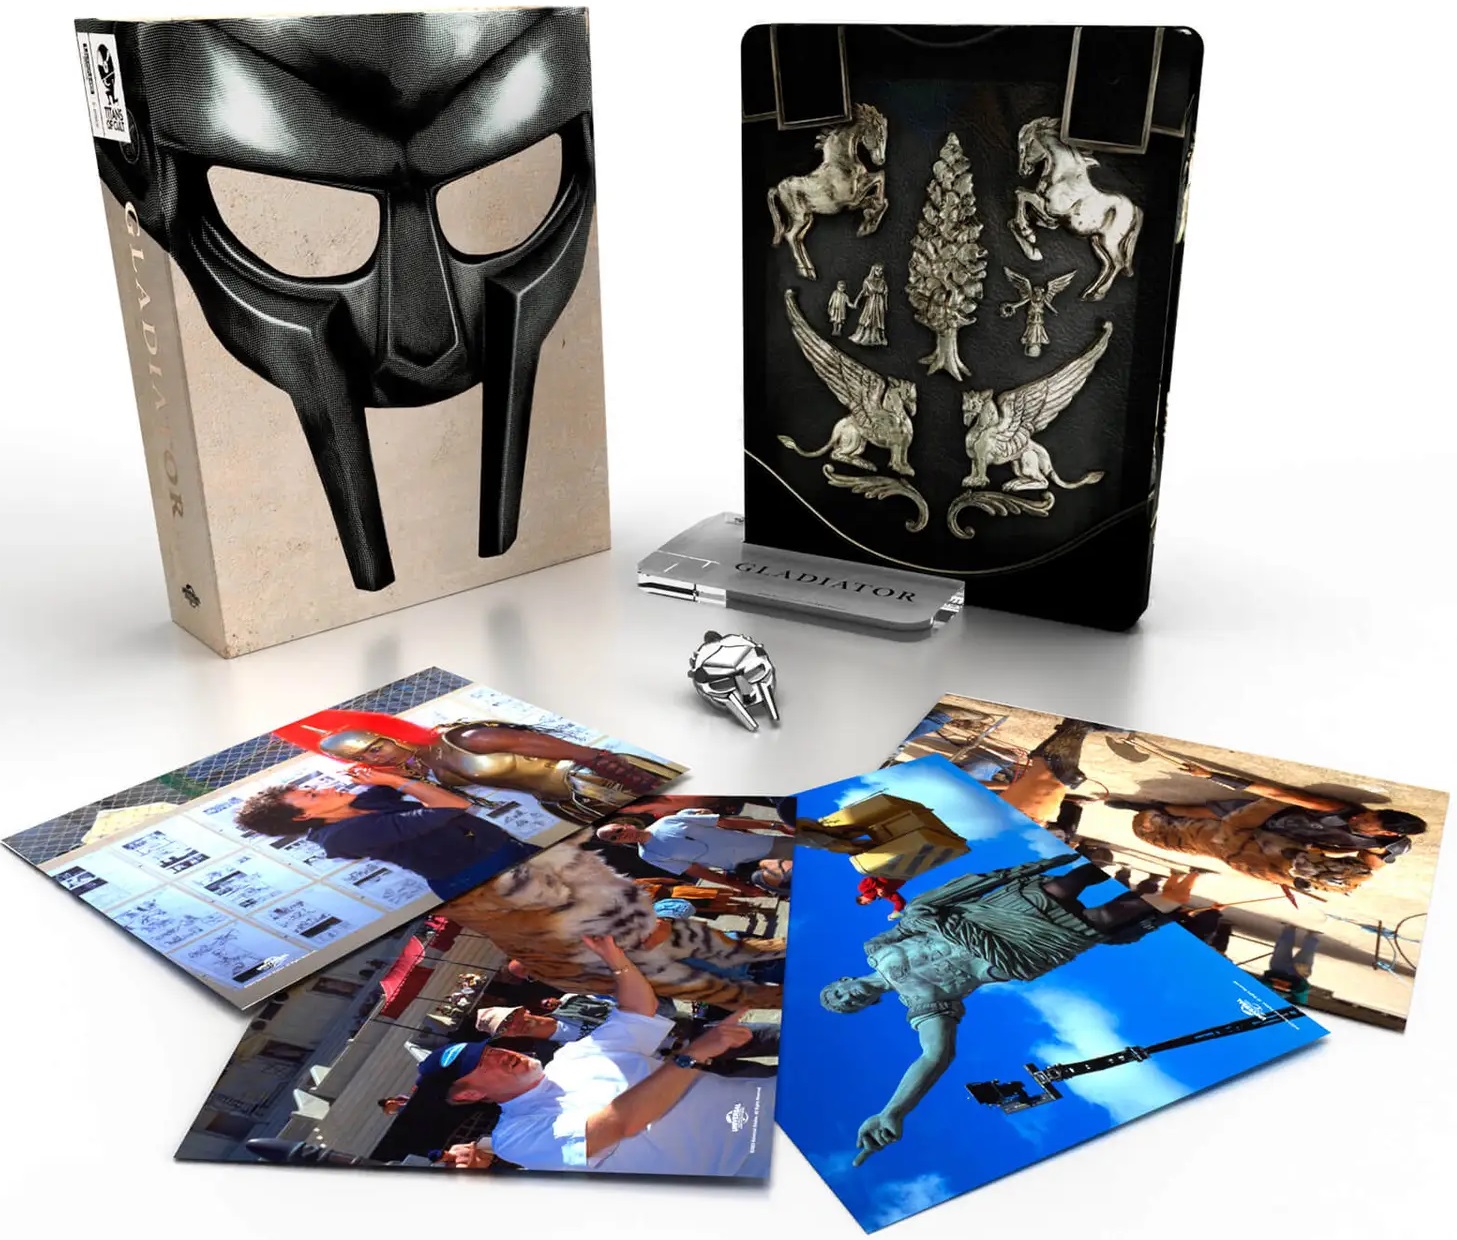 Titans of Cult Archives - Steelbook Blu-ray News